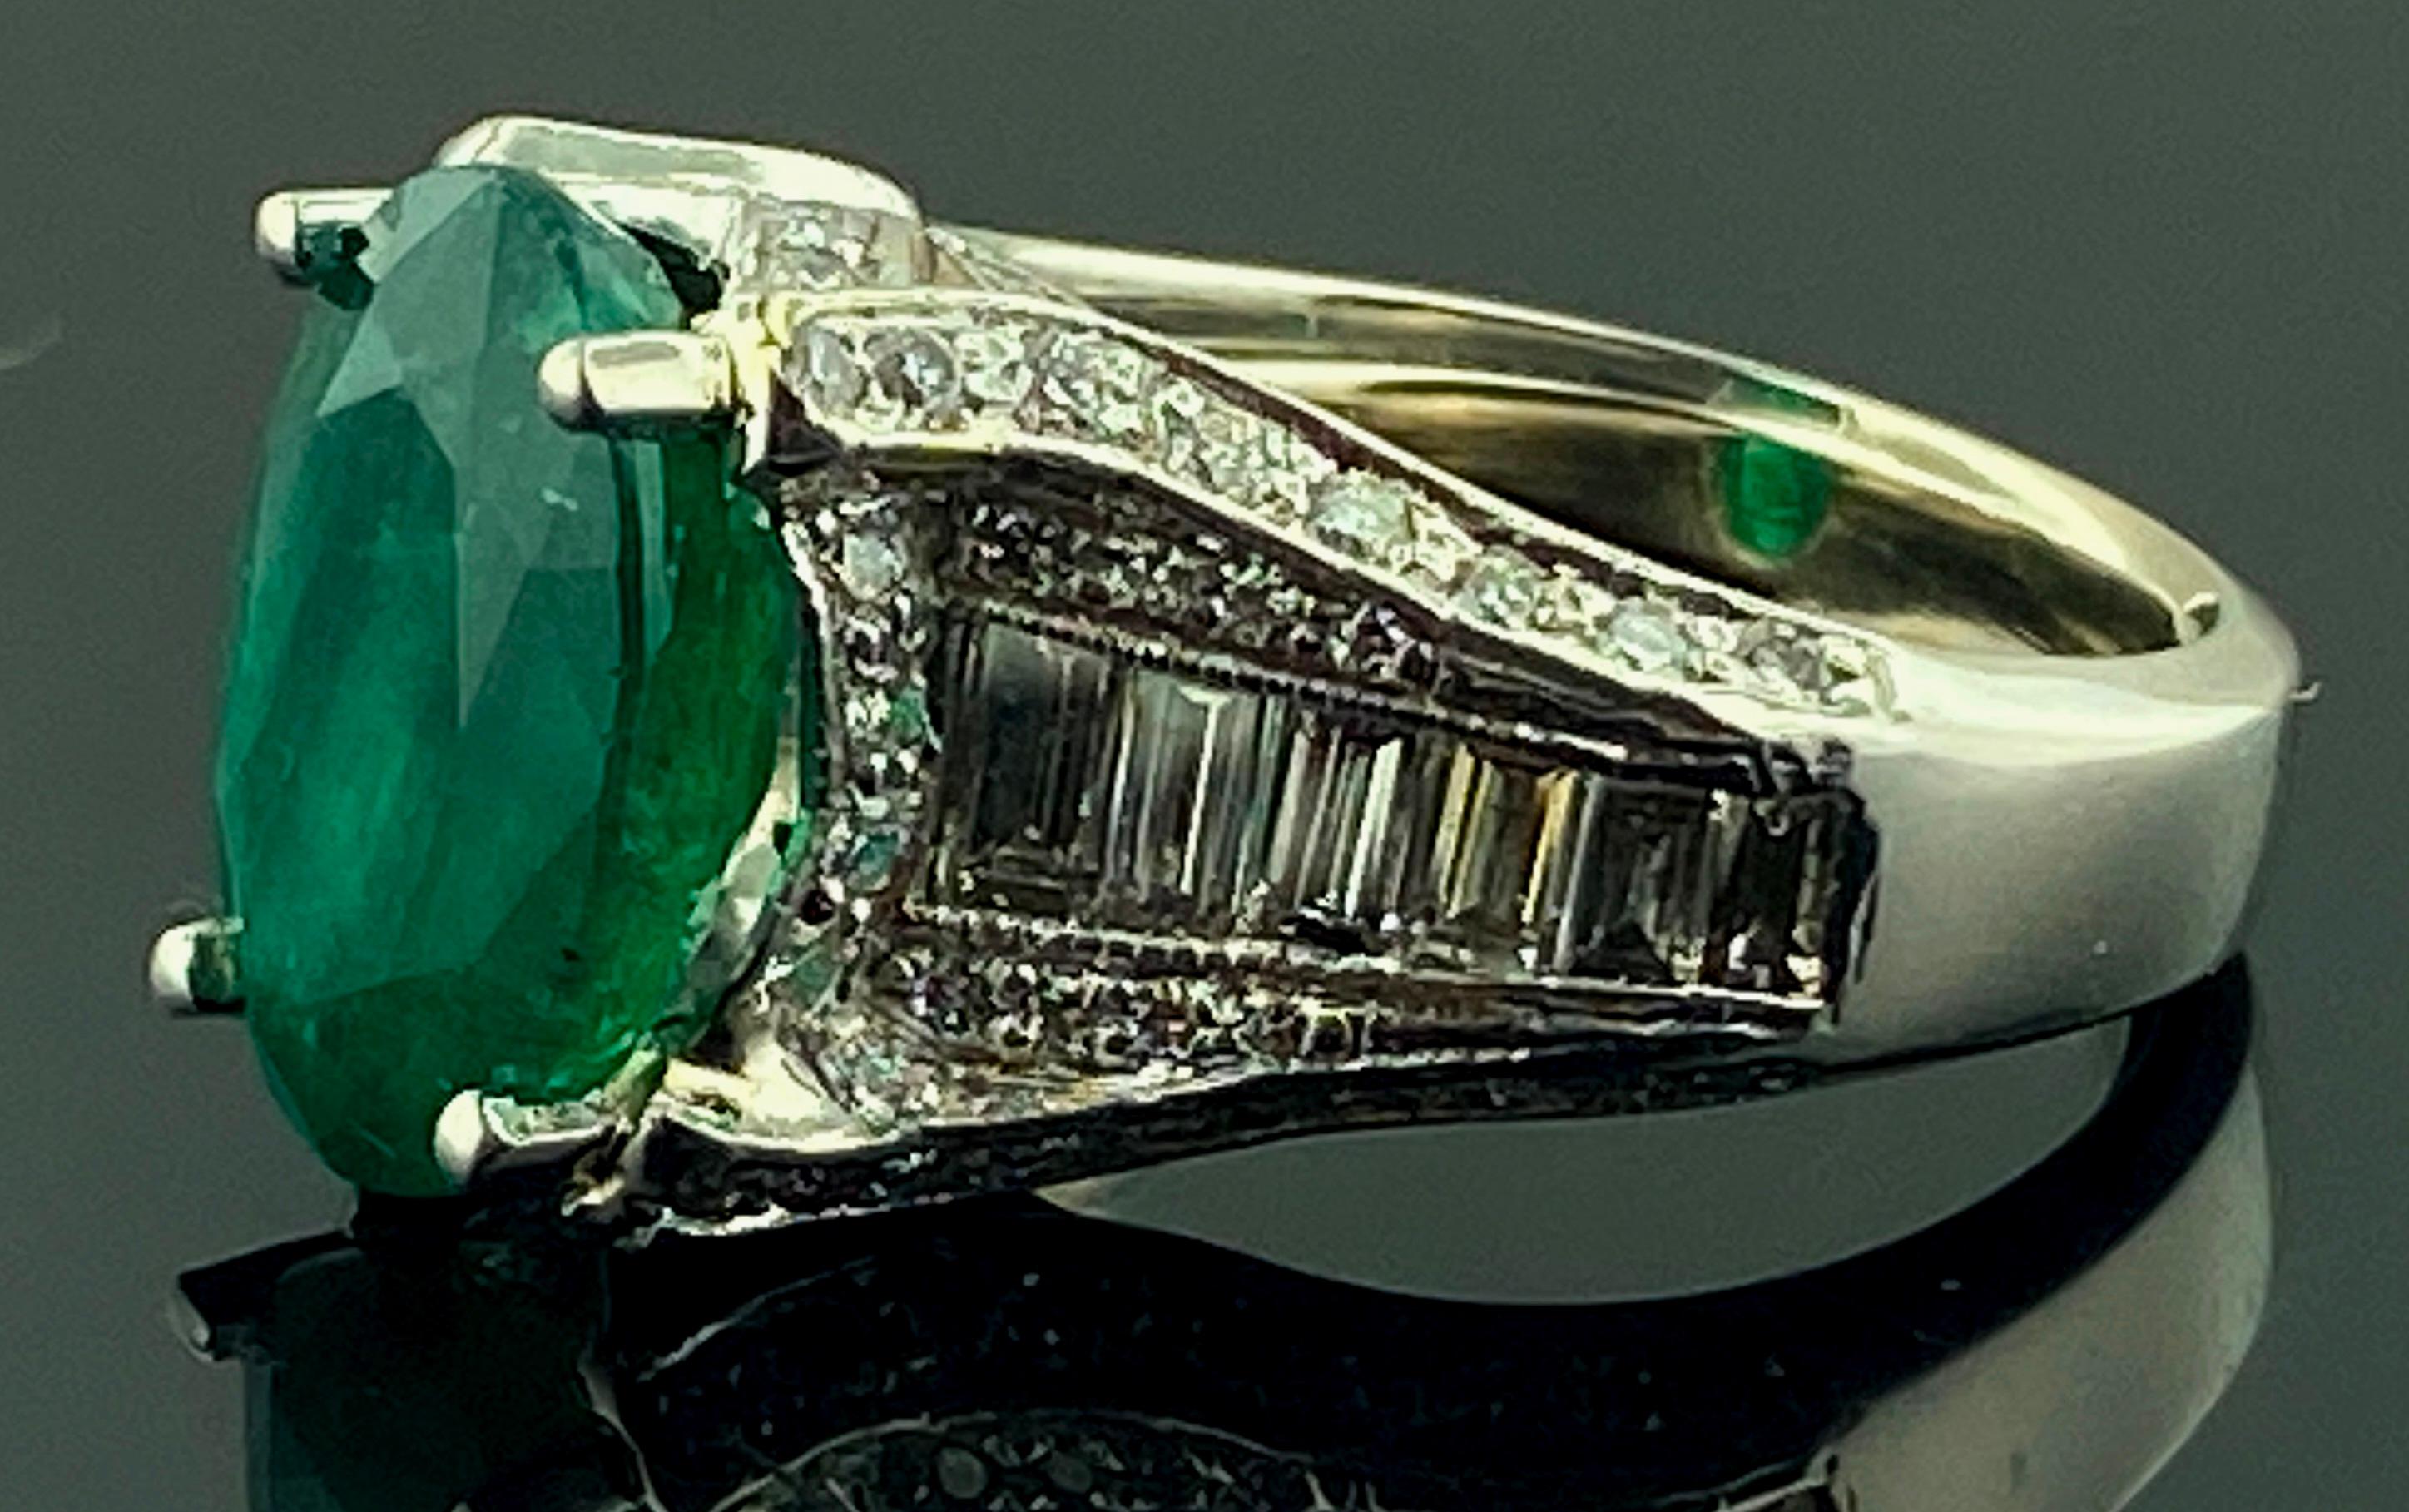 Set in Platinum, with a weight of 16.75 grams, is a 4.80 carat oval cut Emerald flanked with 12 baguette cut diamonds plus 84 round brilliant cut diamonds, with a total diamond weight of 1.85 carats.  Color is G-H, Clarity is VVS.  Ring size is 5.5.